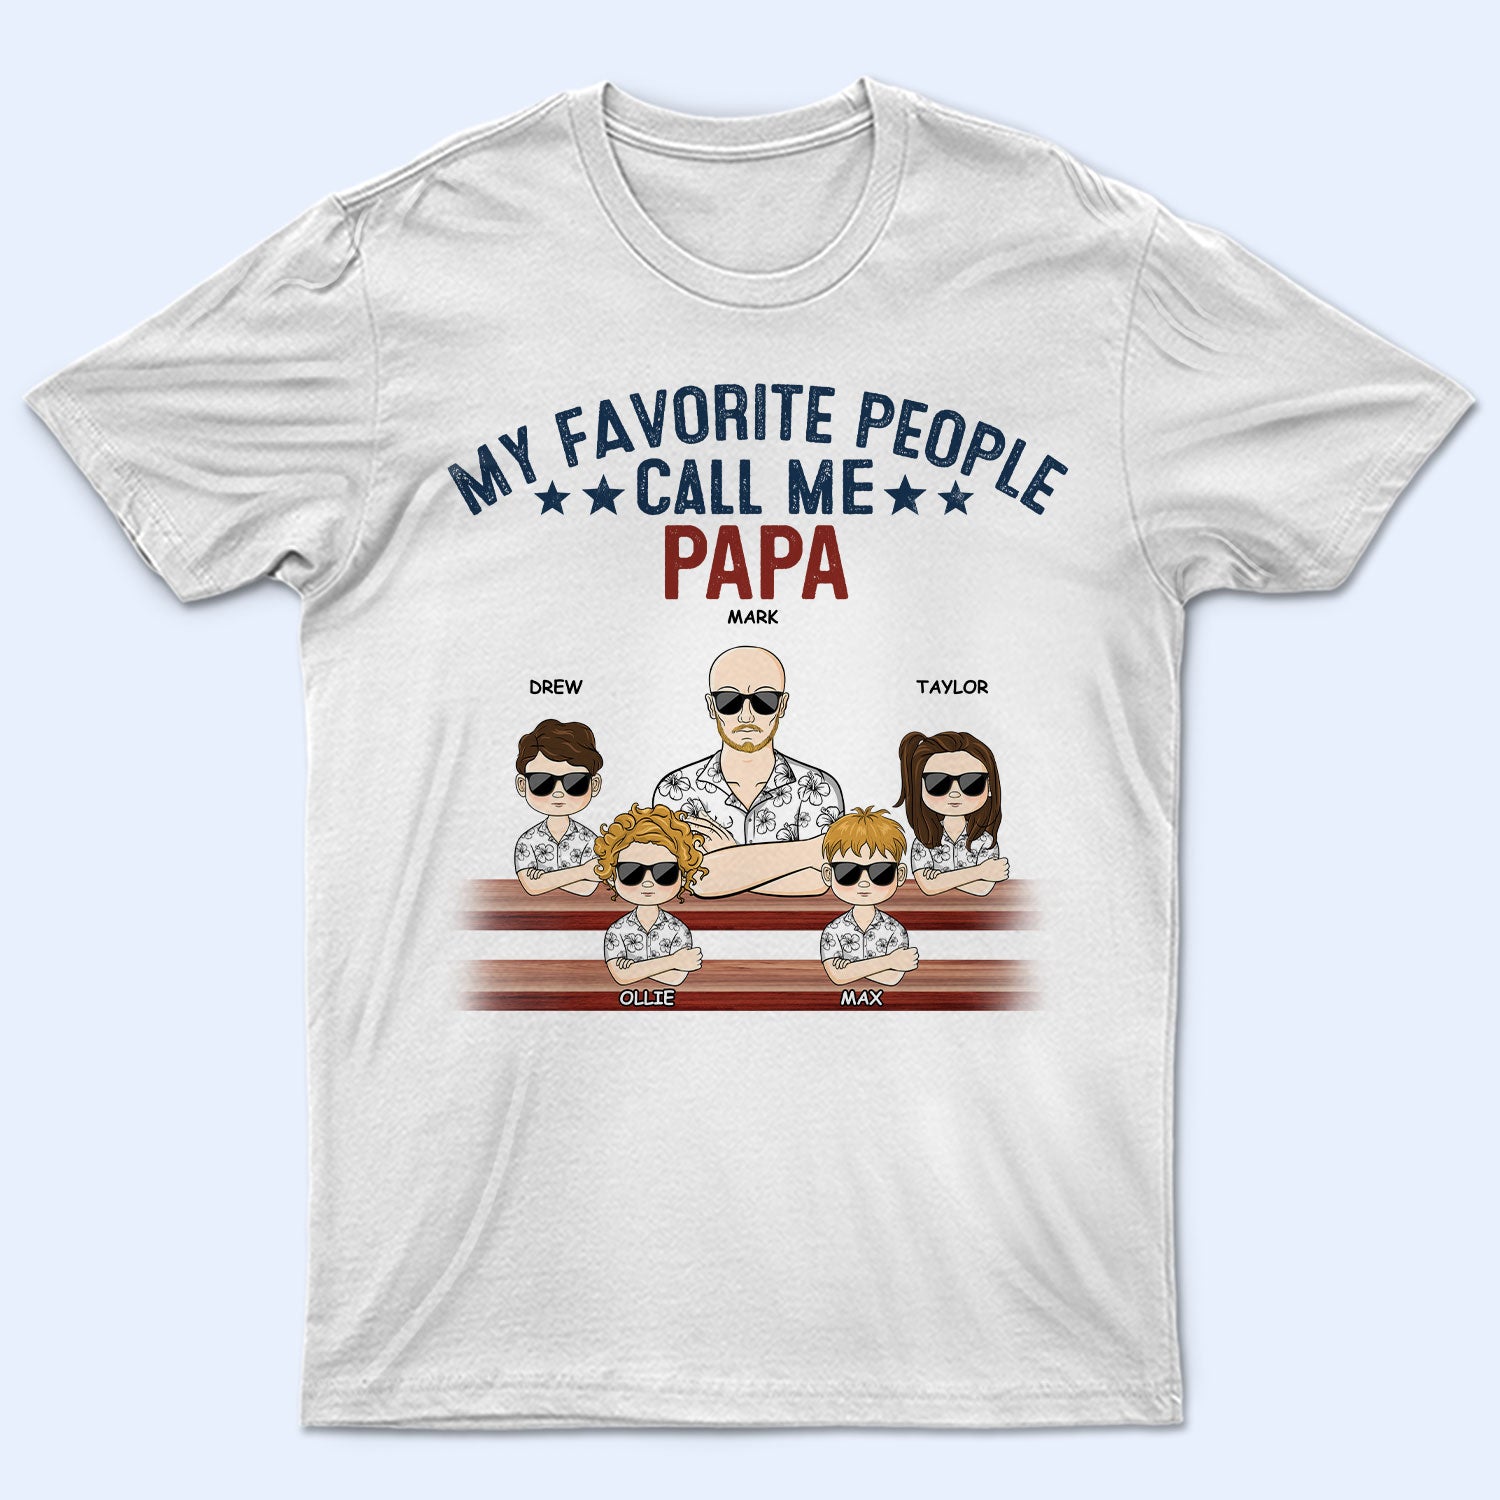 My Favorite People Call Me Papa - Birthday, Loving Gift For Dad, Father, Grandpa, Grandfather, Grandparents, Family - Personalized Custom T Shirt